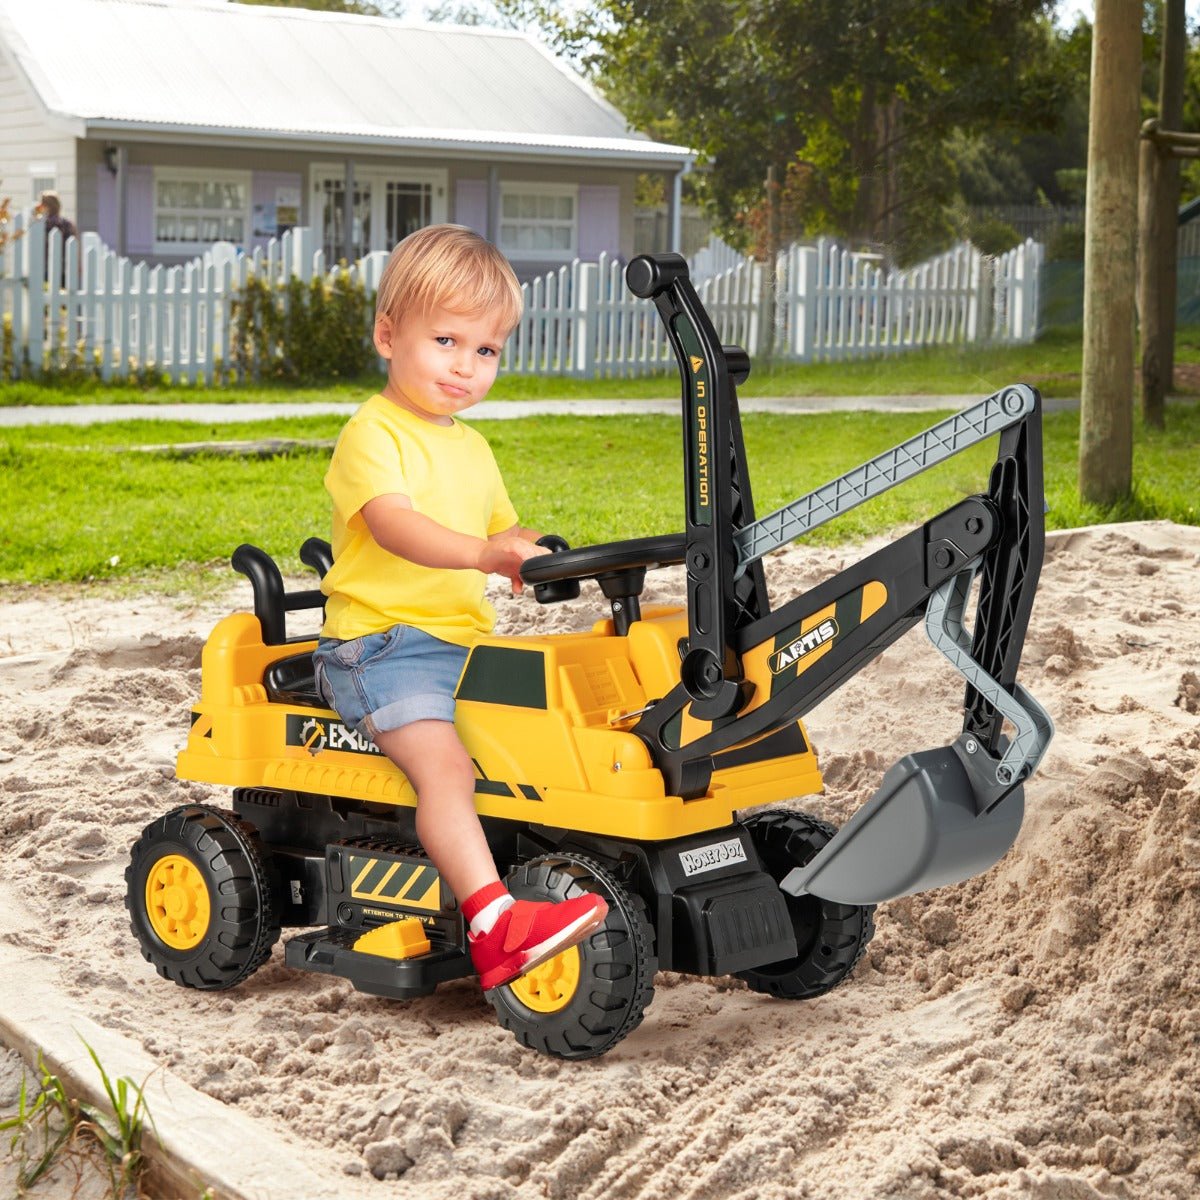 Explore the Outdoors with a Yellow Ride On Excavator